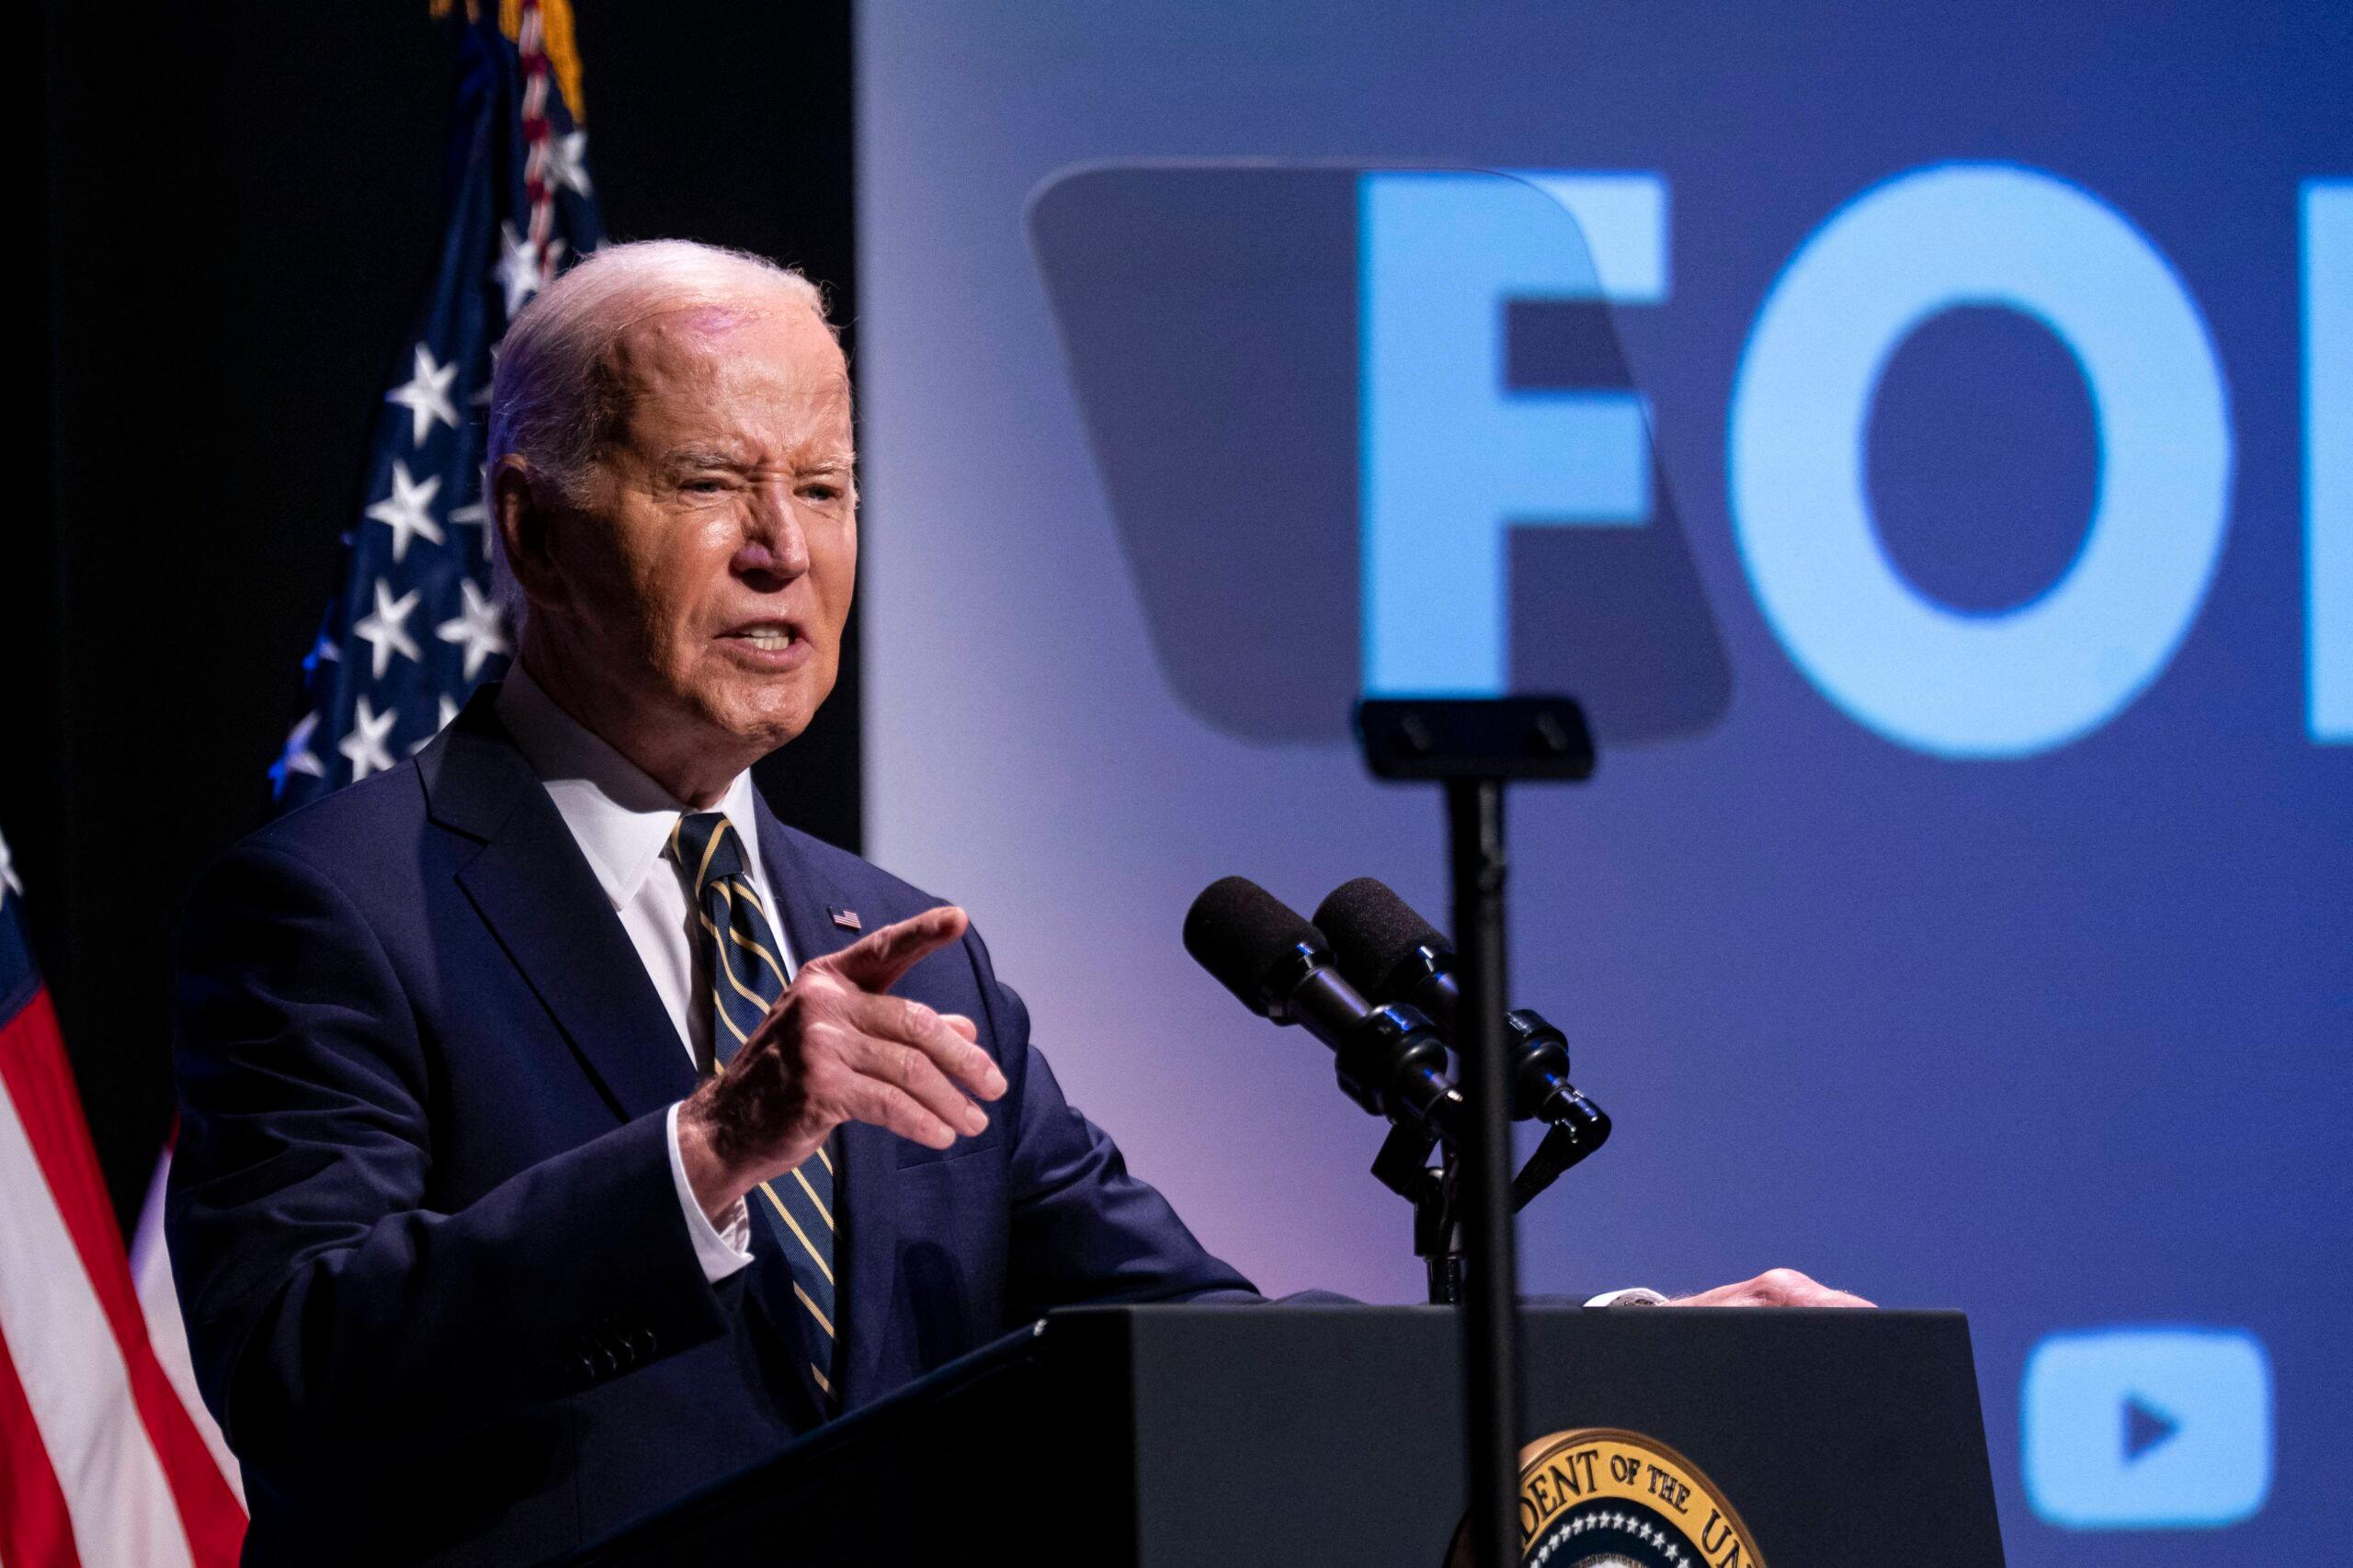 Biden remarks at the National Museum of African American History and Culture